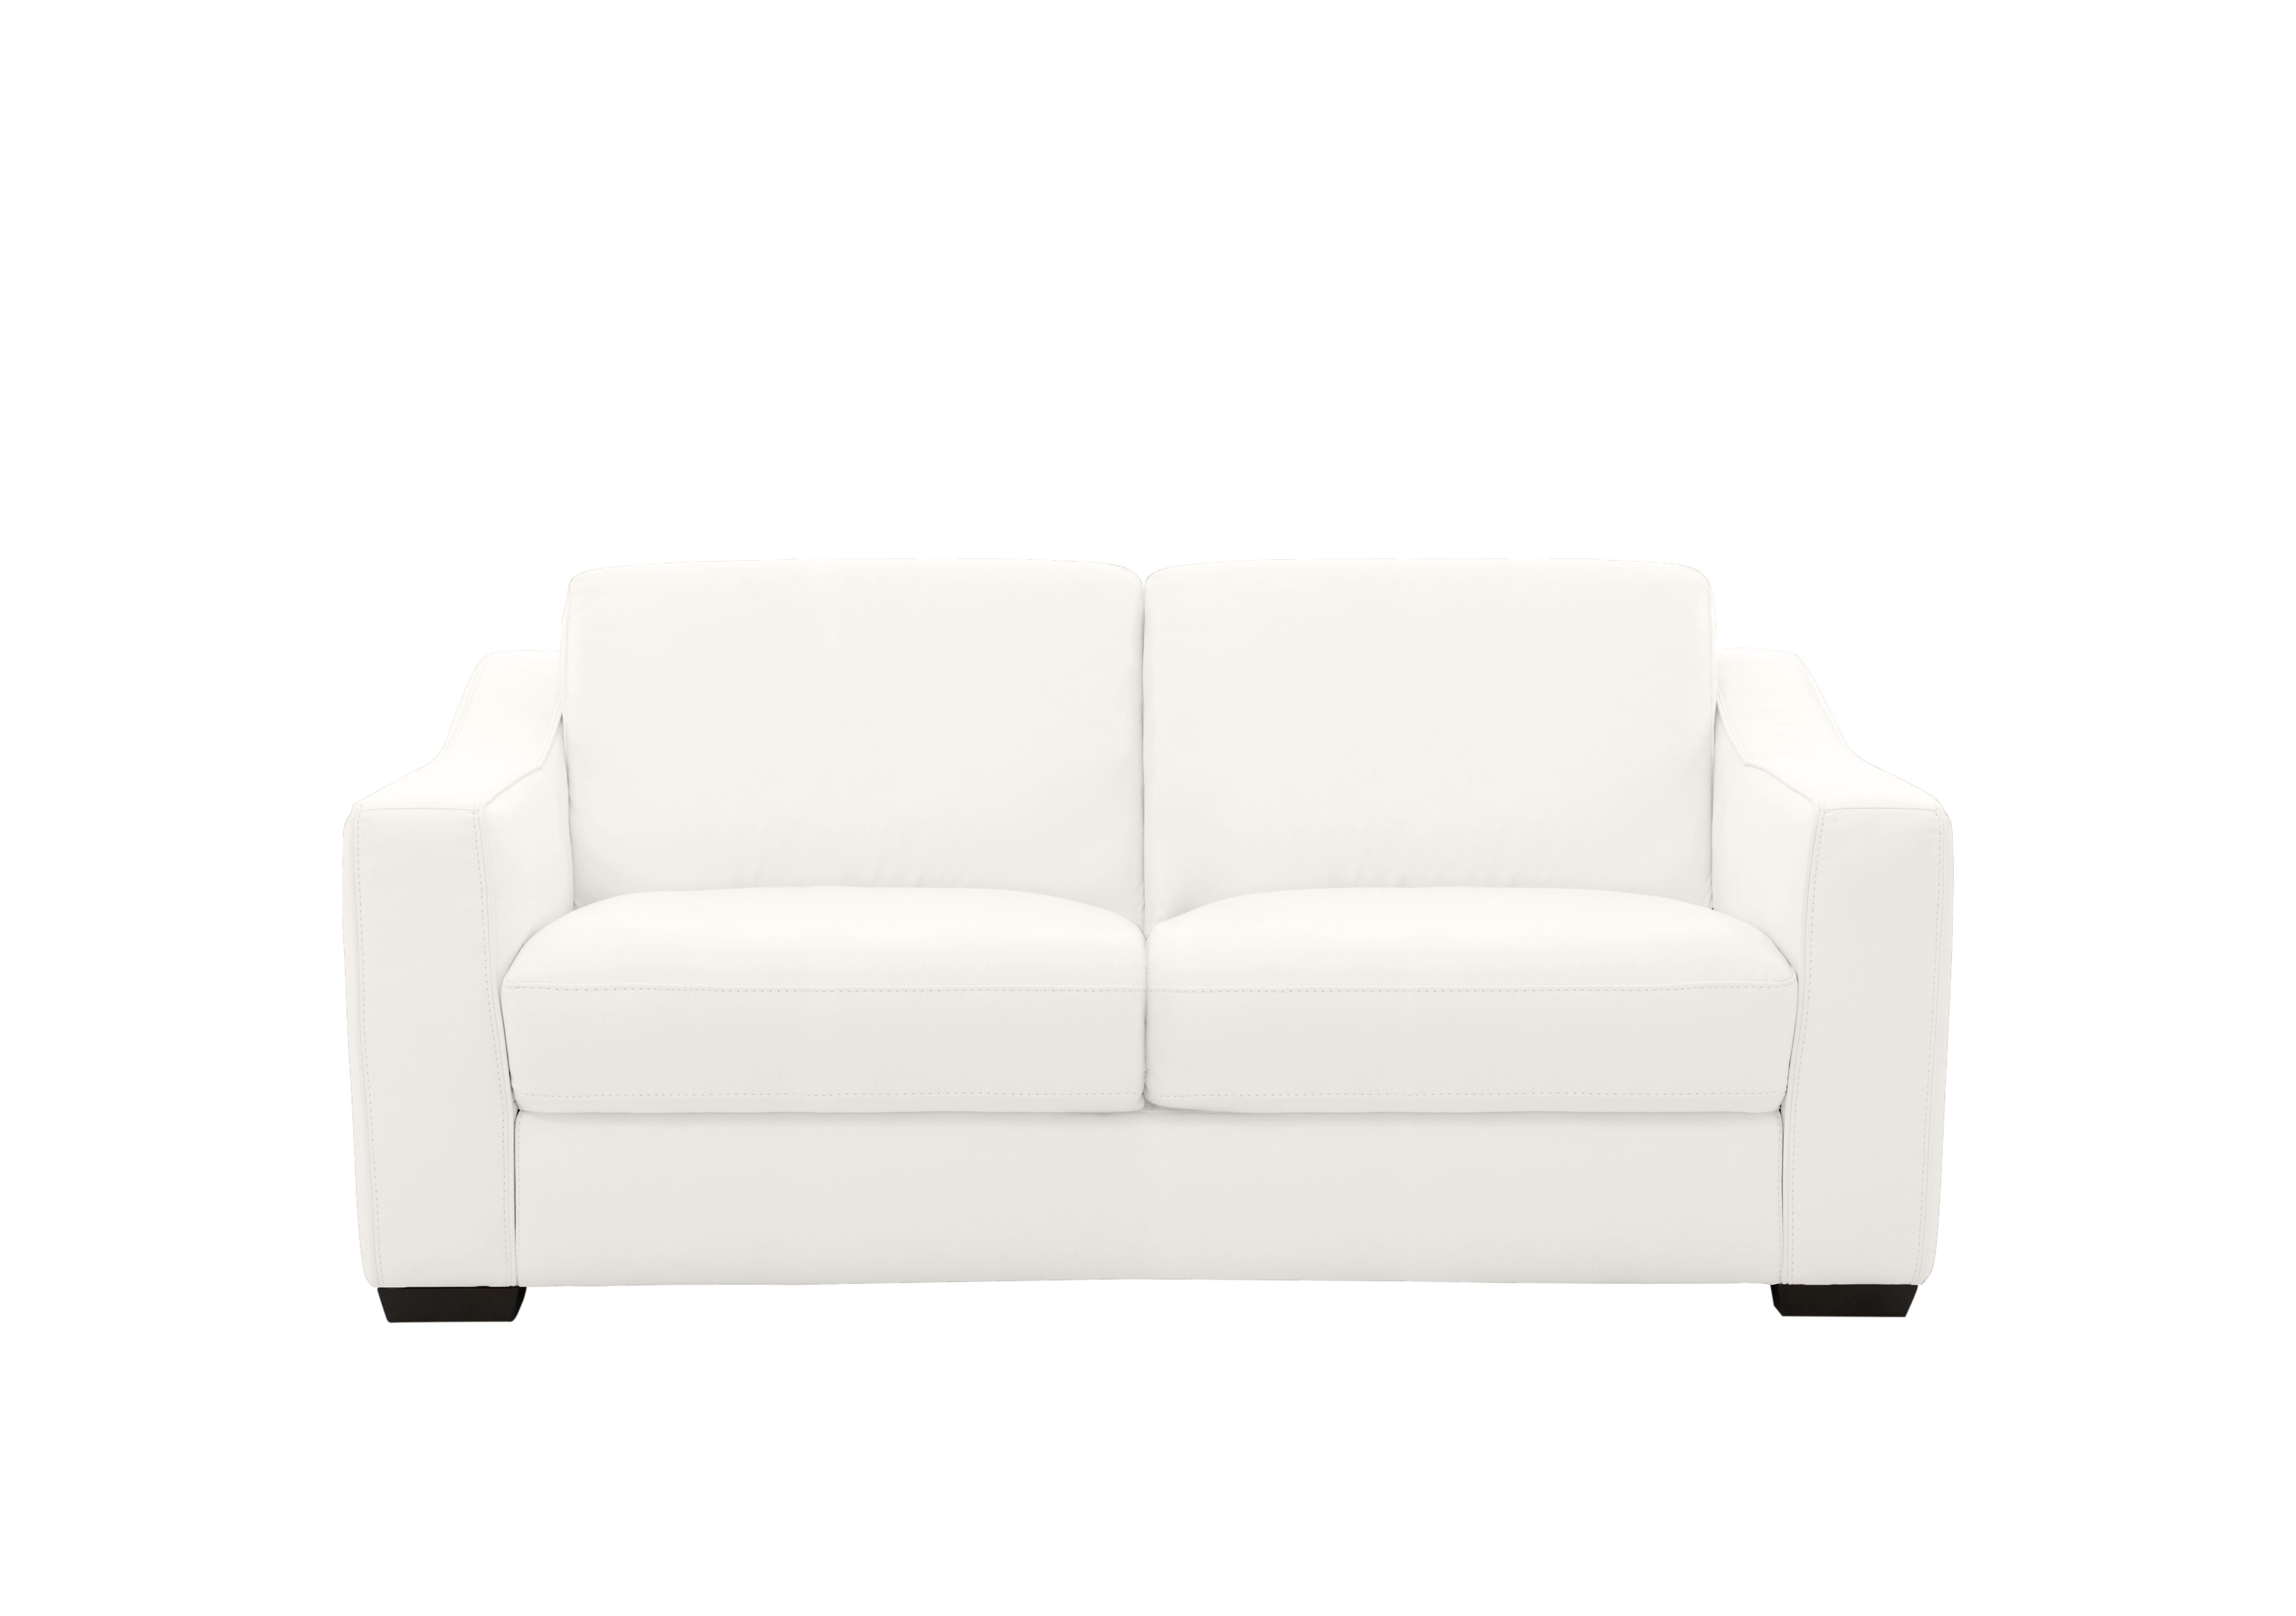 Optimus 2 Seater Leather Sofa in Bv-744d Star White on Furniture Village